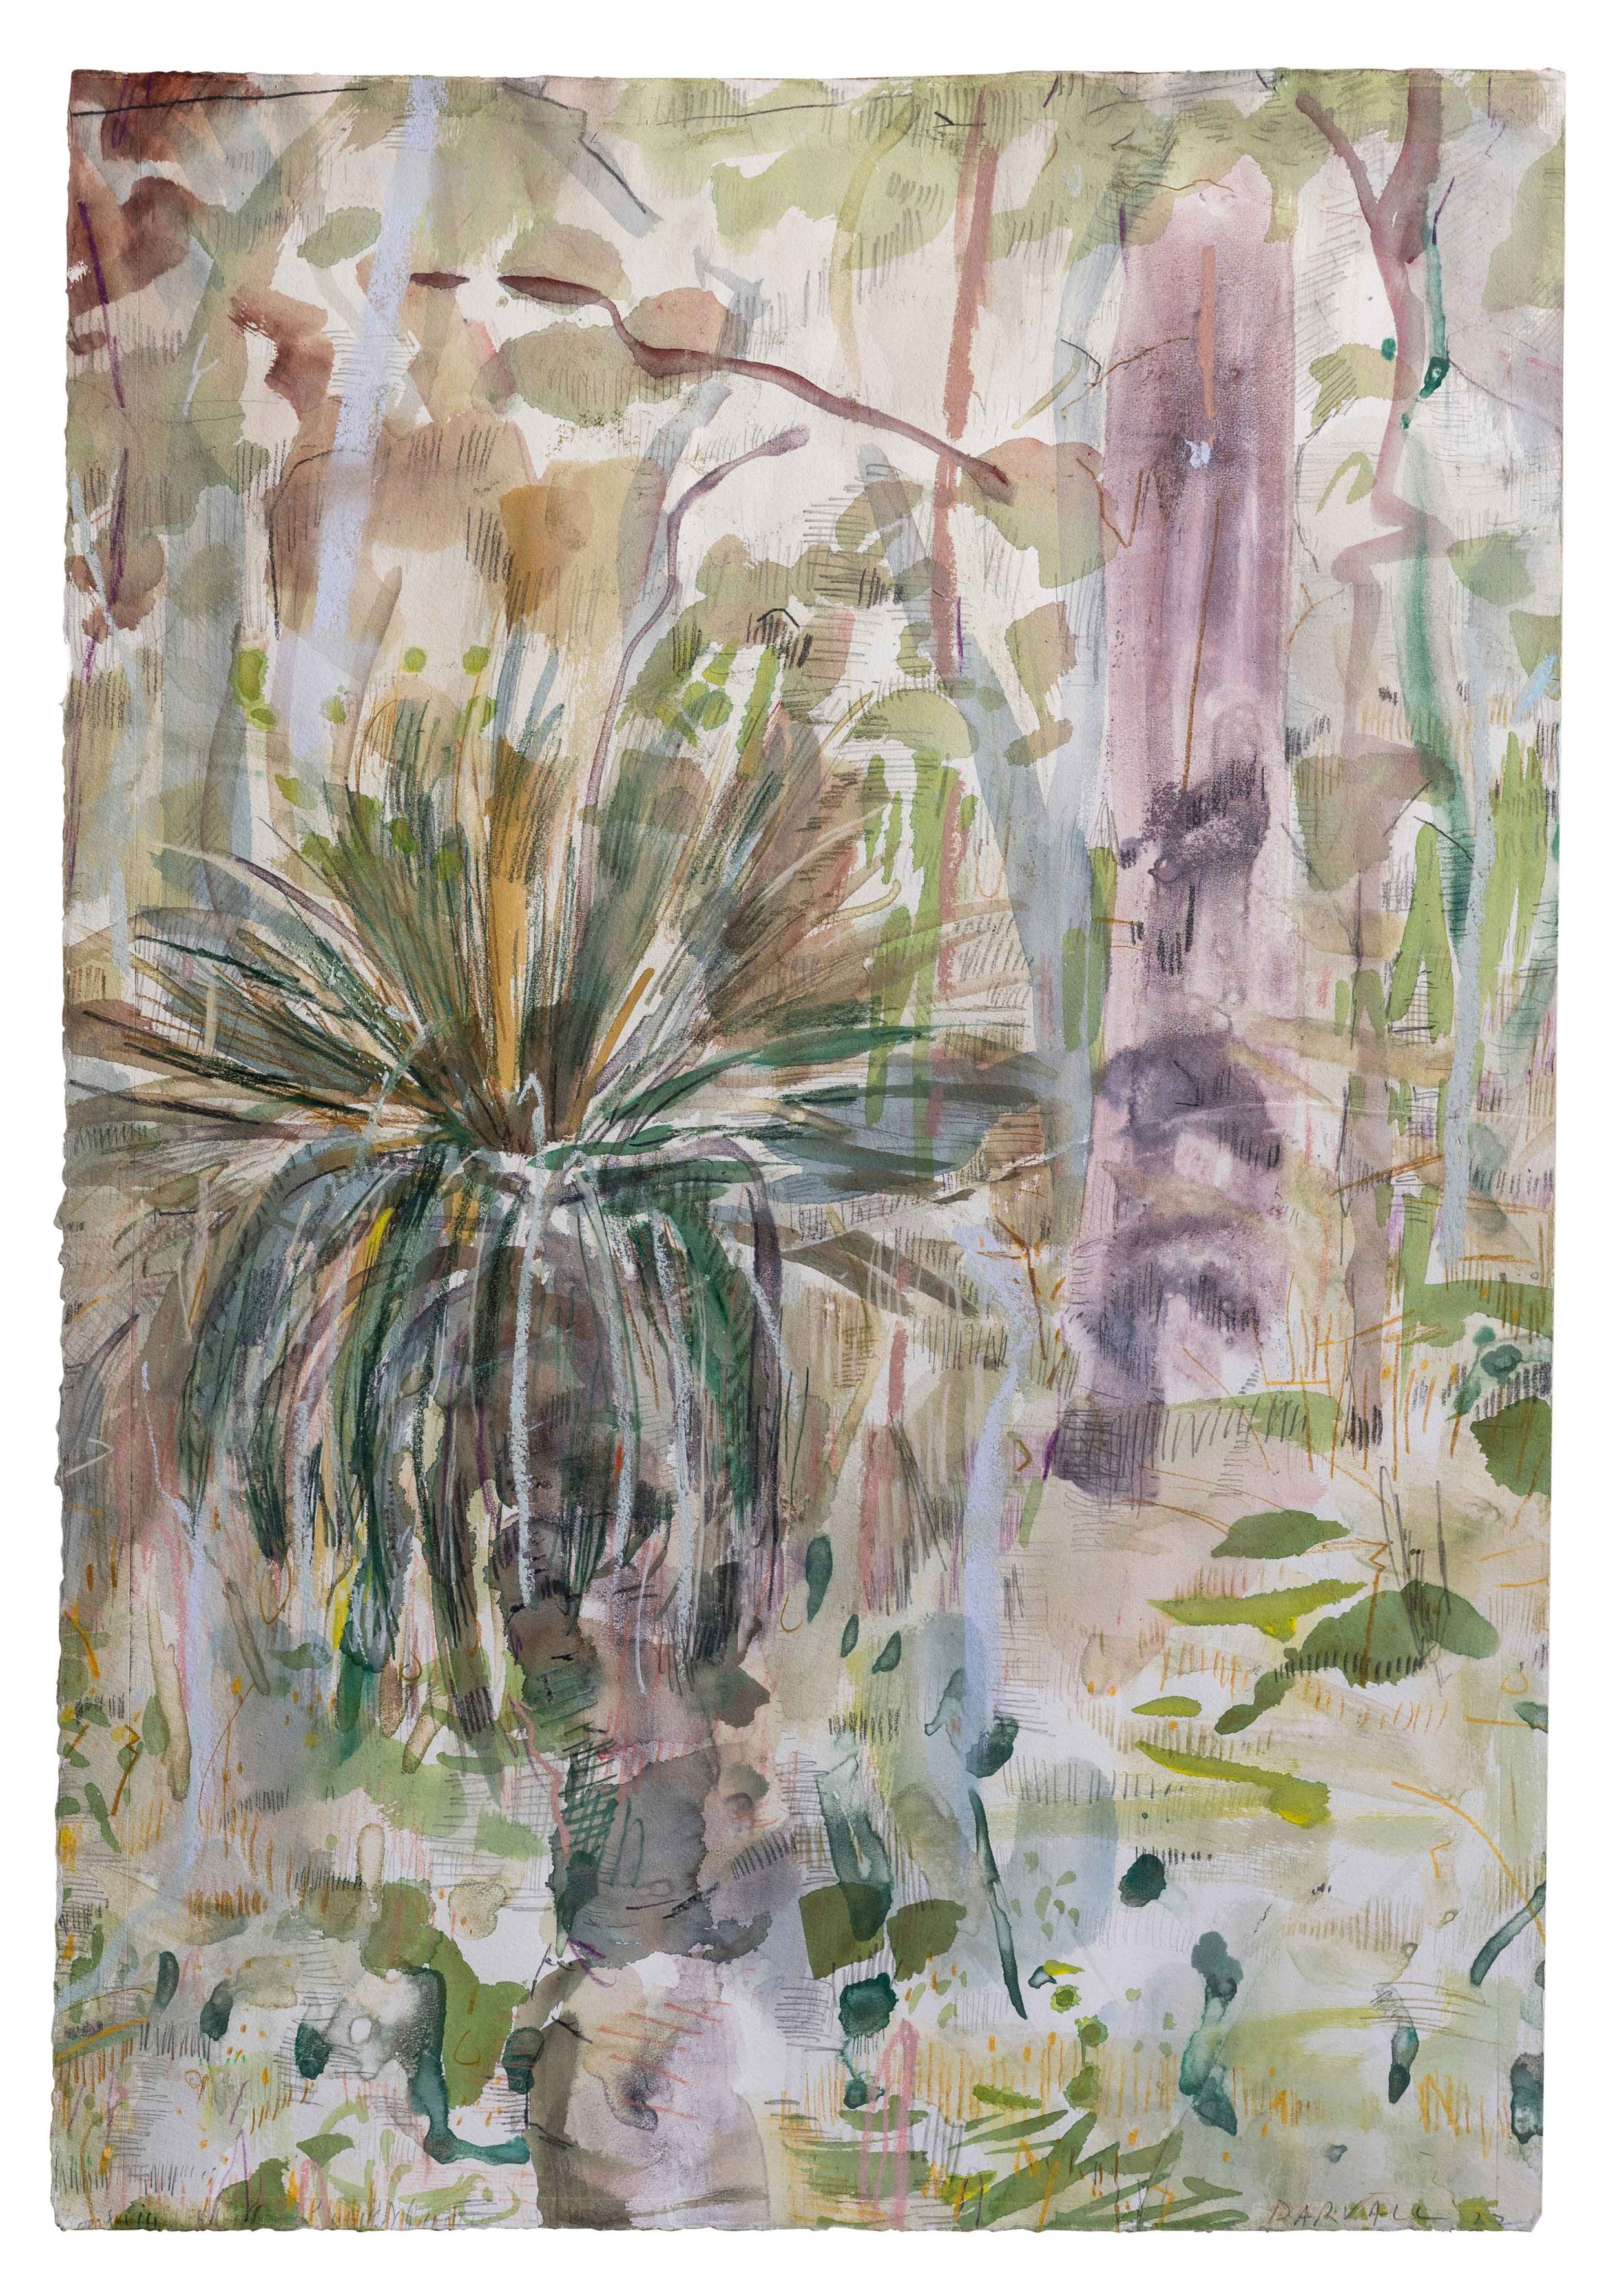  Boranup Forest G 2022 Watercolour Monoprint with Pastle and pencil on Hahnemule Paper 68 x 88 cm  Linton and Kay Galleries Perth (Sold) 